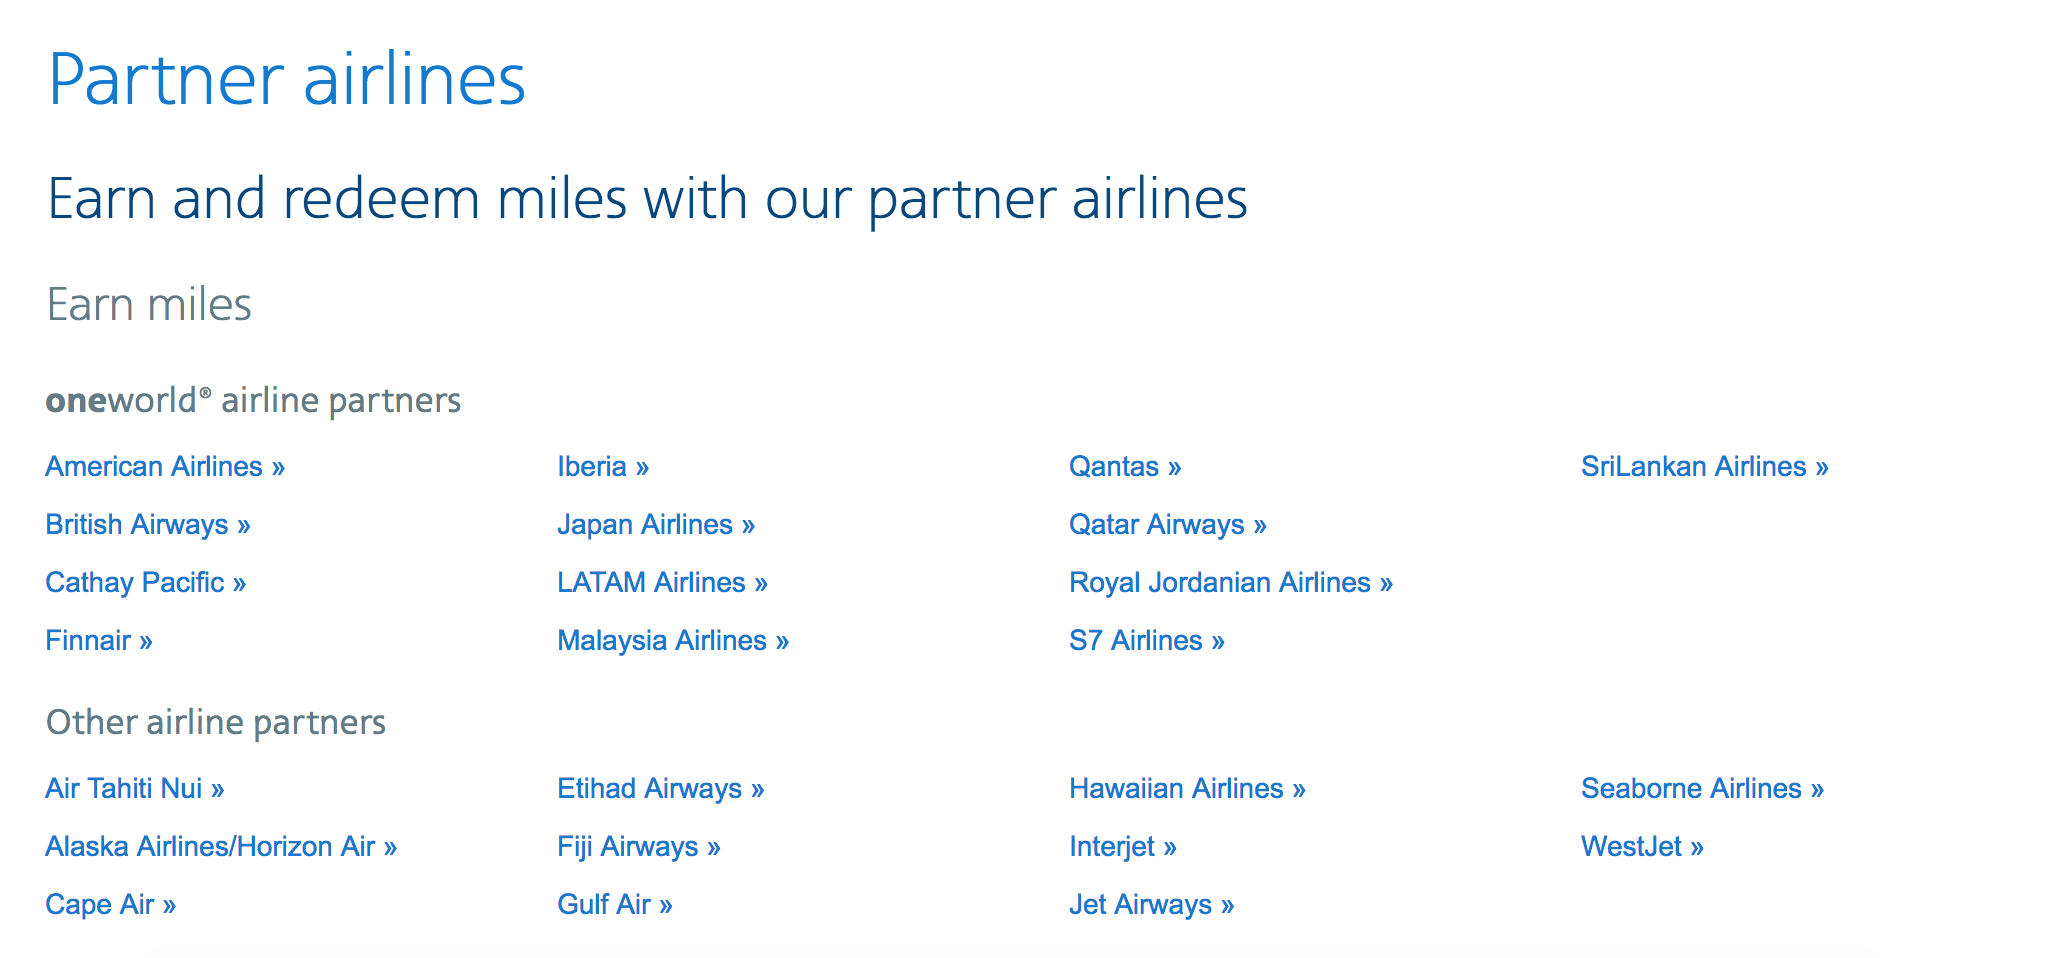 American has both Oneworld and non-Oneworld partners.